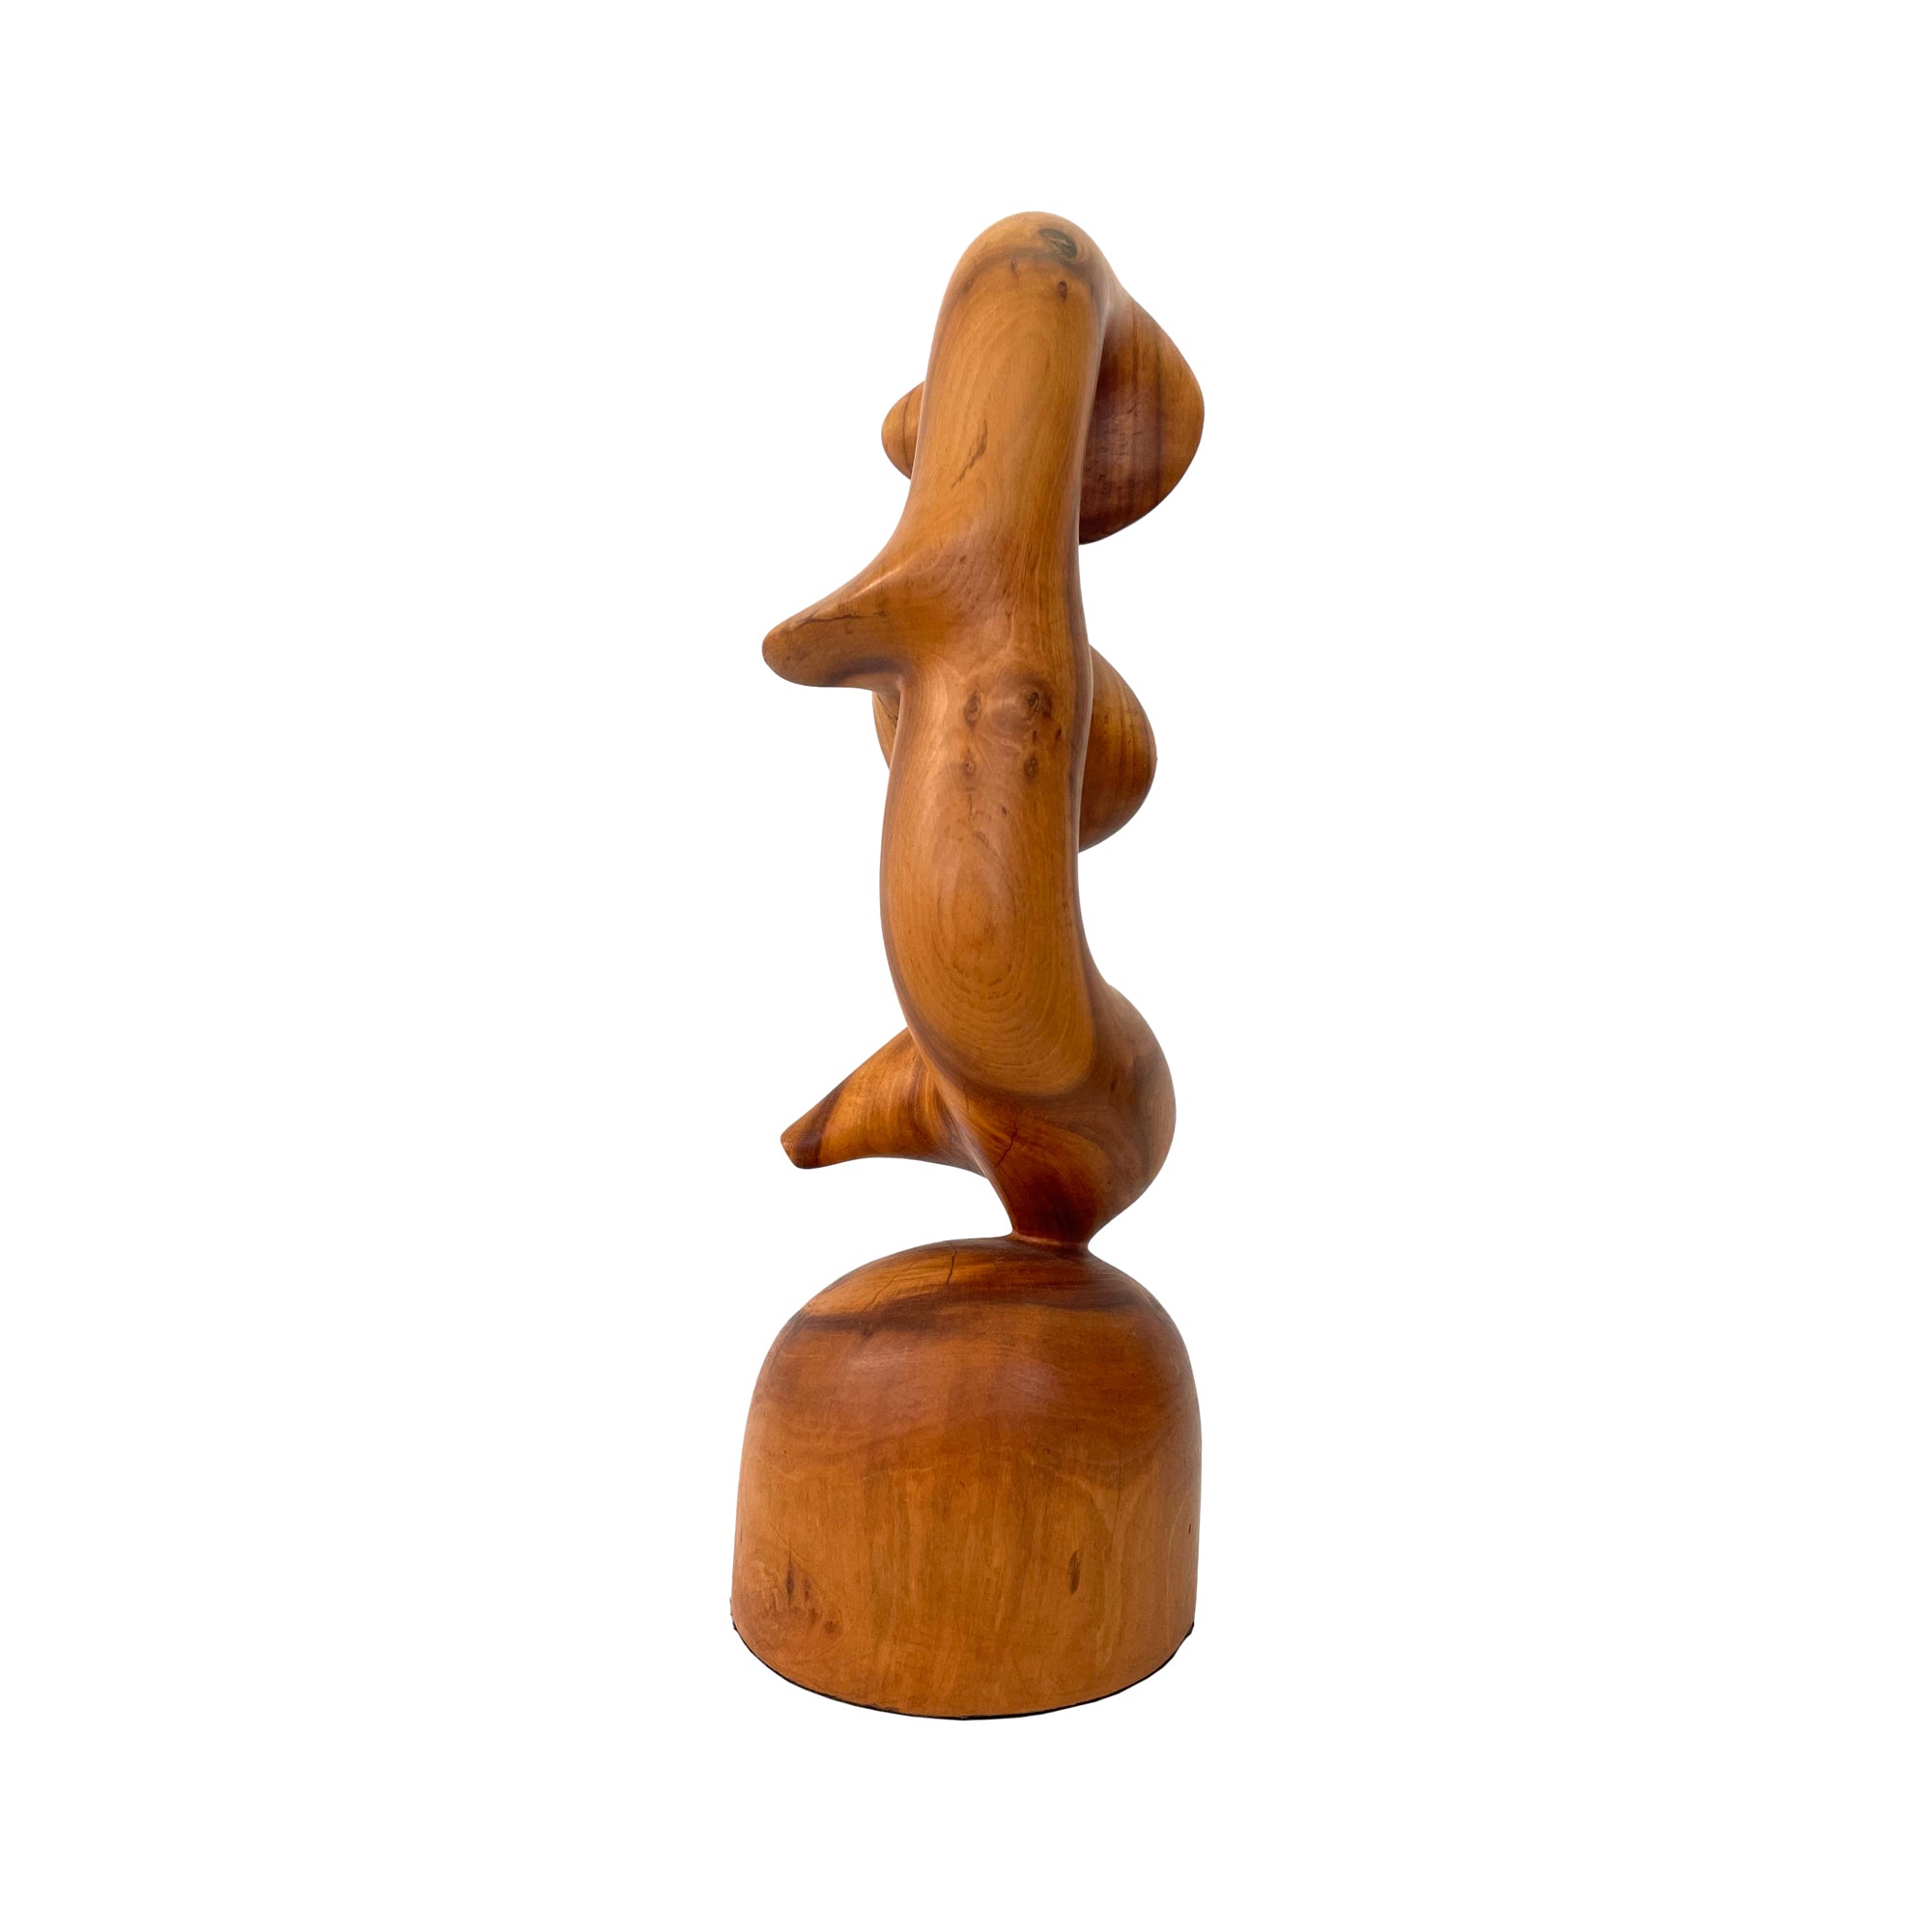 Biomorphic Carved Wood Totemic Sculpture